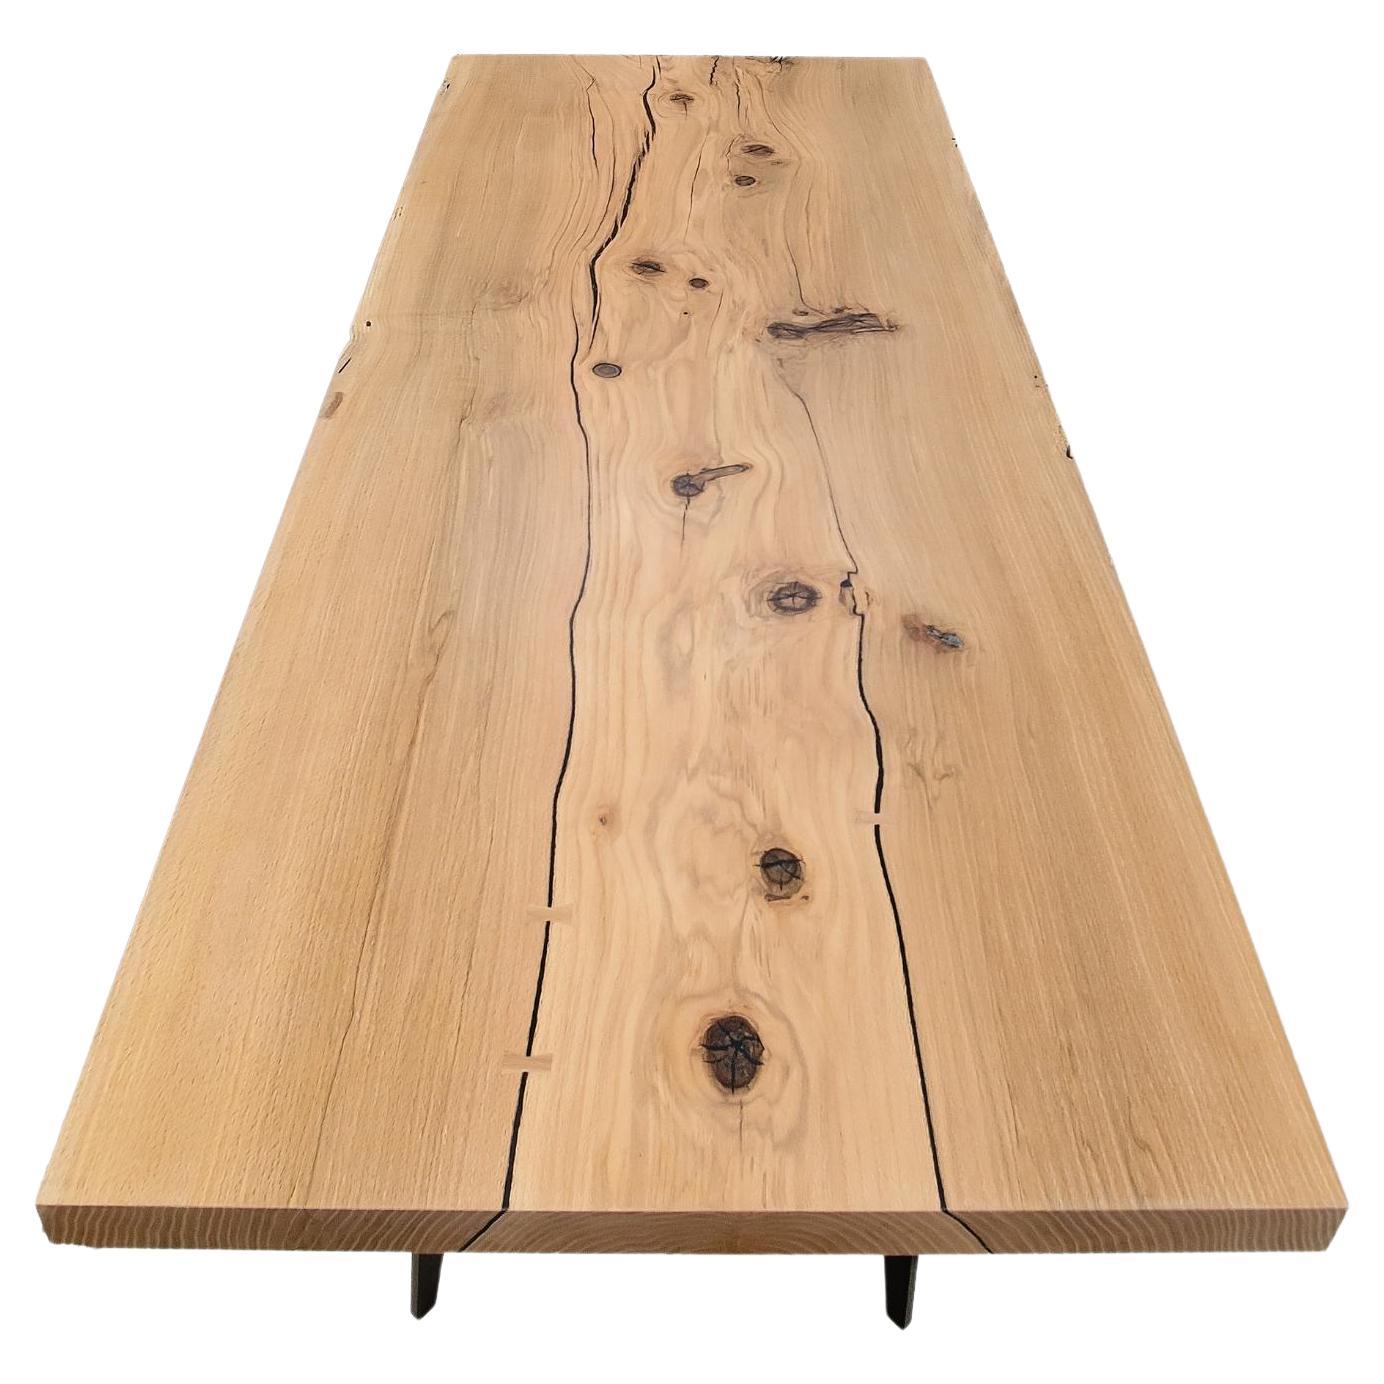 A substantial, thick slab of Canadian Red Oak atop a cold-rolled steel base showcases the clean lines and minimal design of this dining or conference table. Featuring hand-crafted Red Oak butterfly inlays to support the natural texture and reinforce